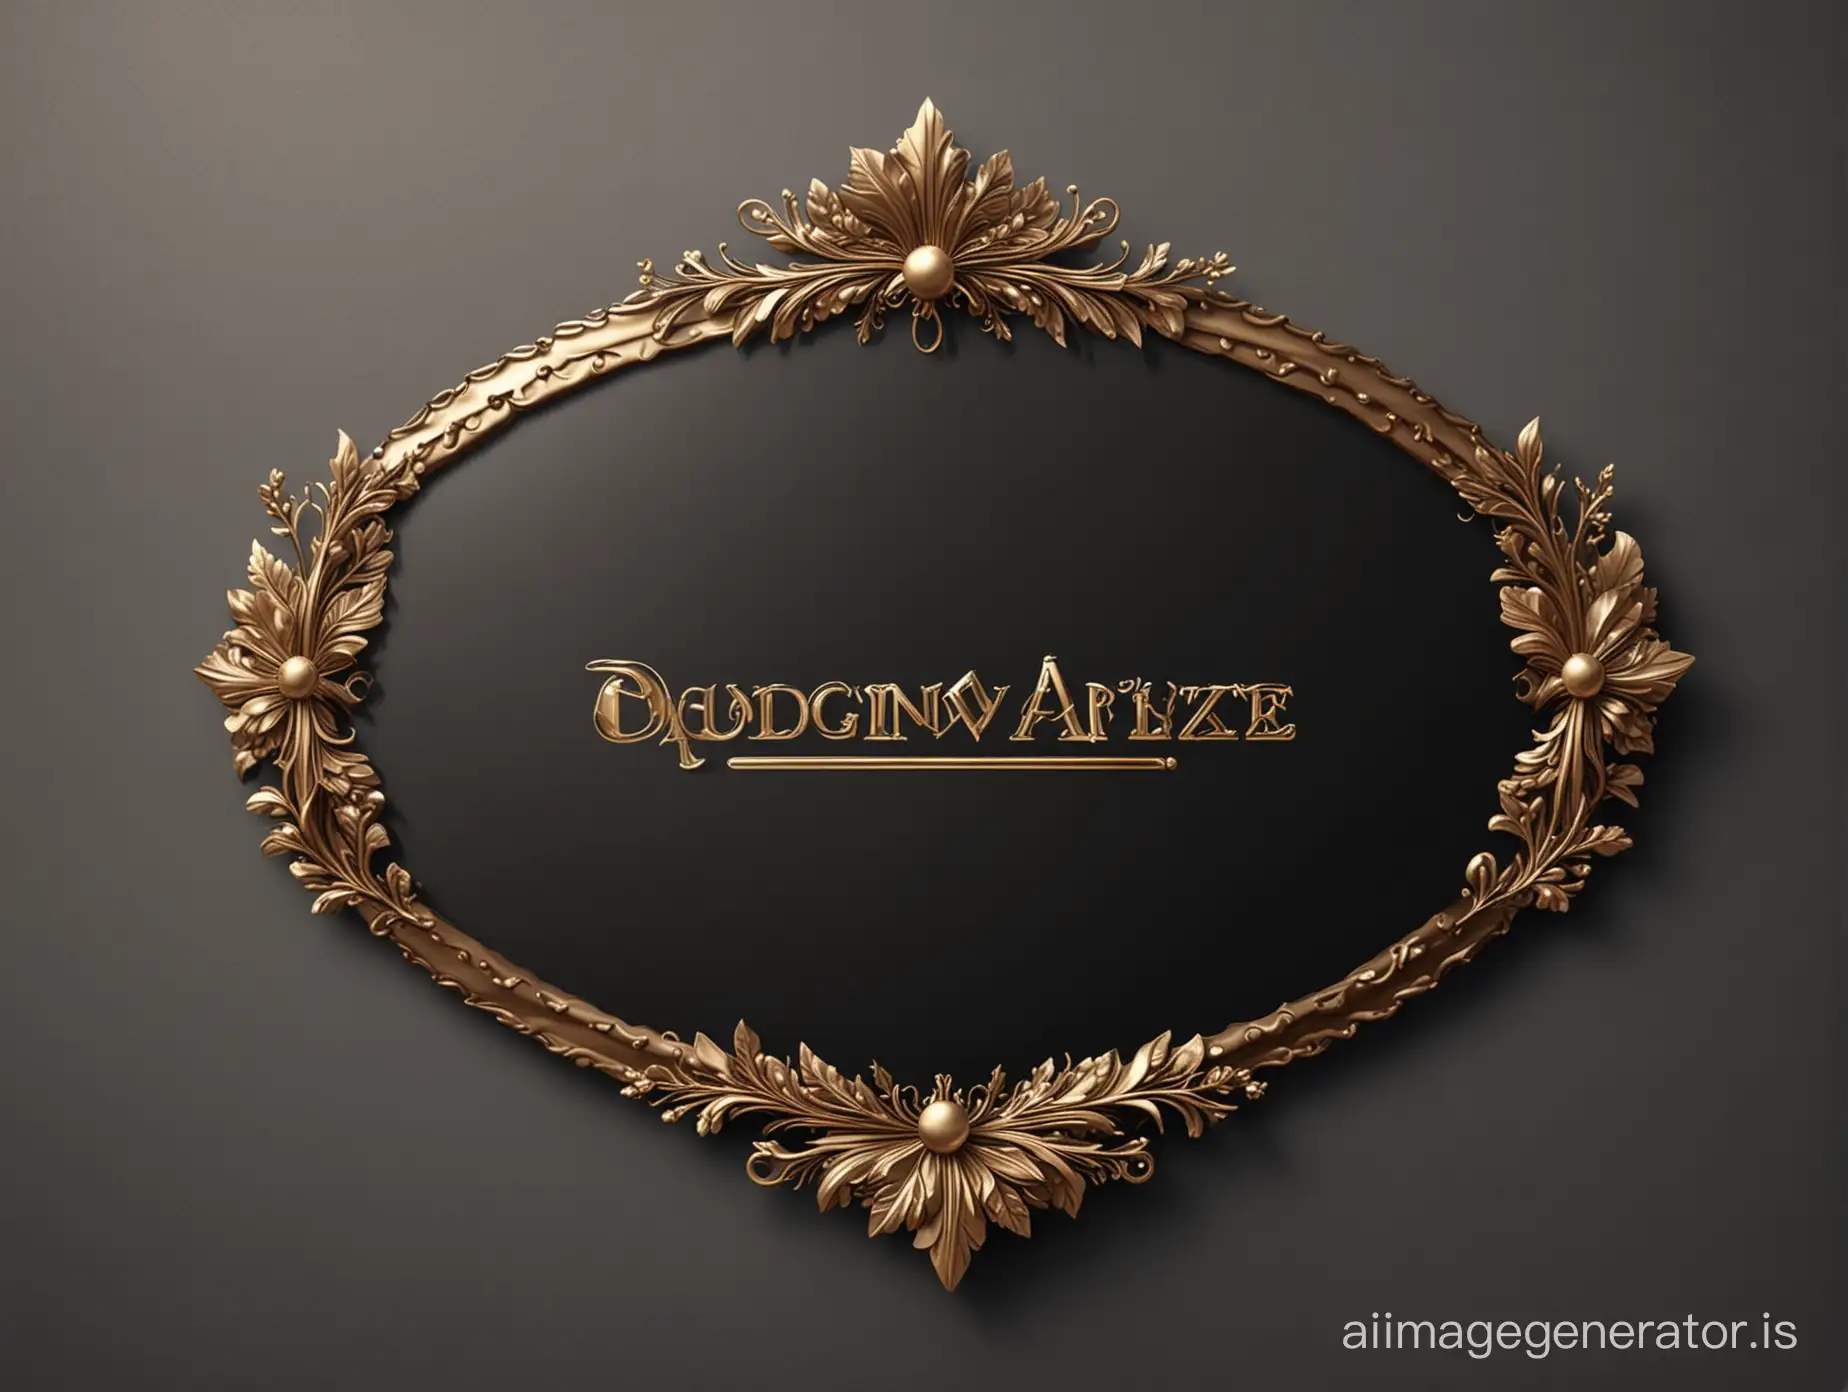 Curved-Wreath-Bronze-Plaque-with-Text-Fantasy-Realistic-Vector-Illustration